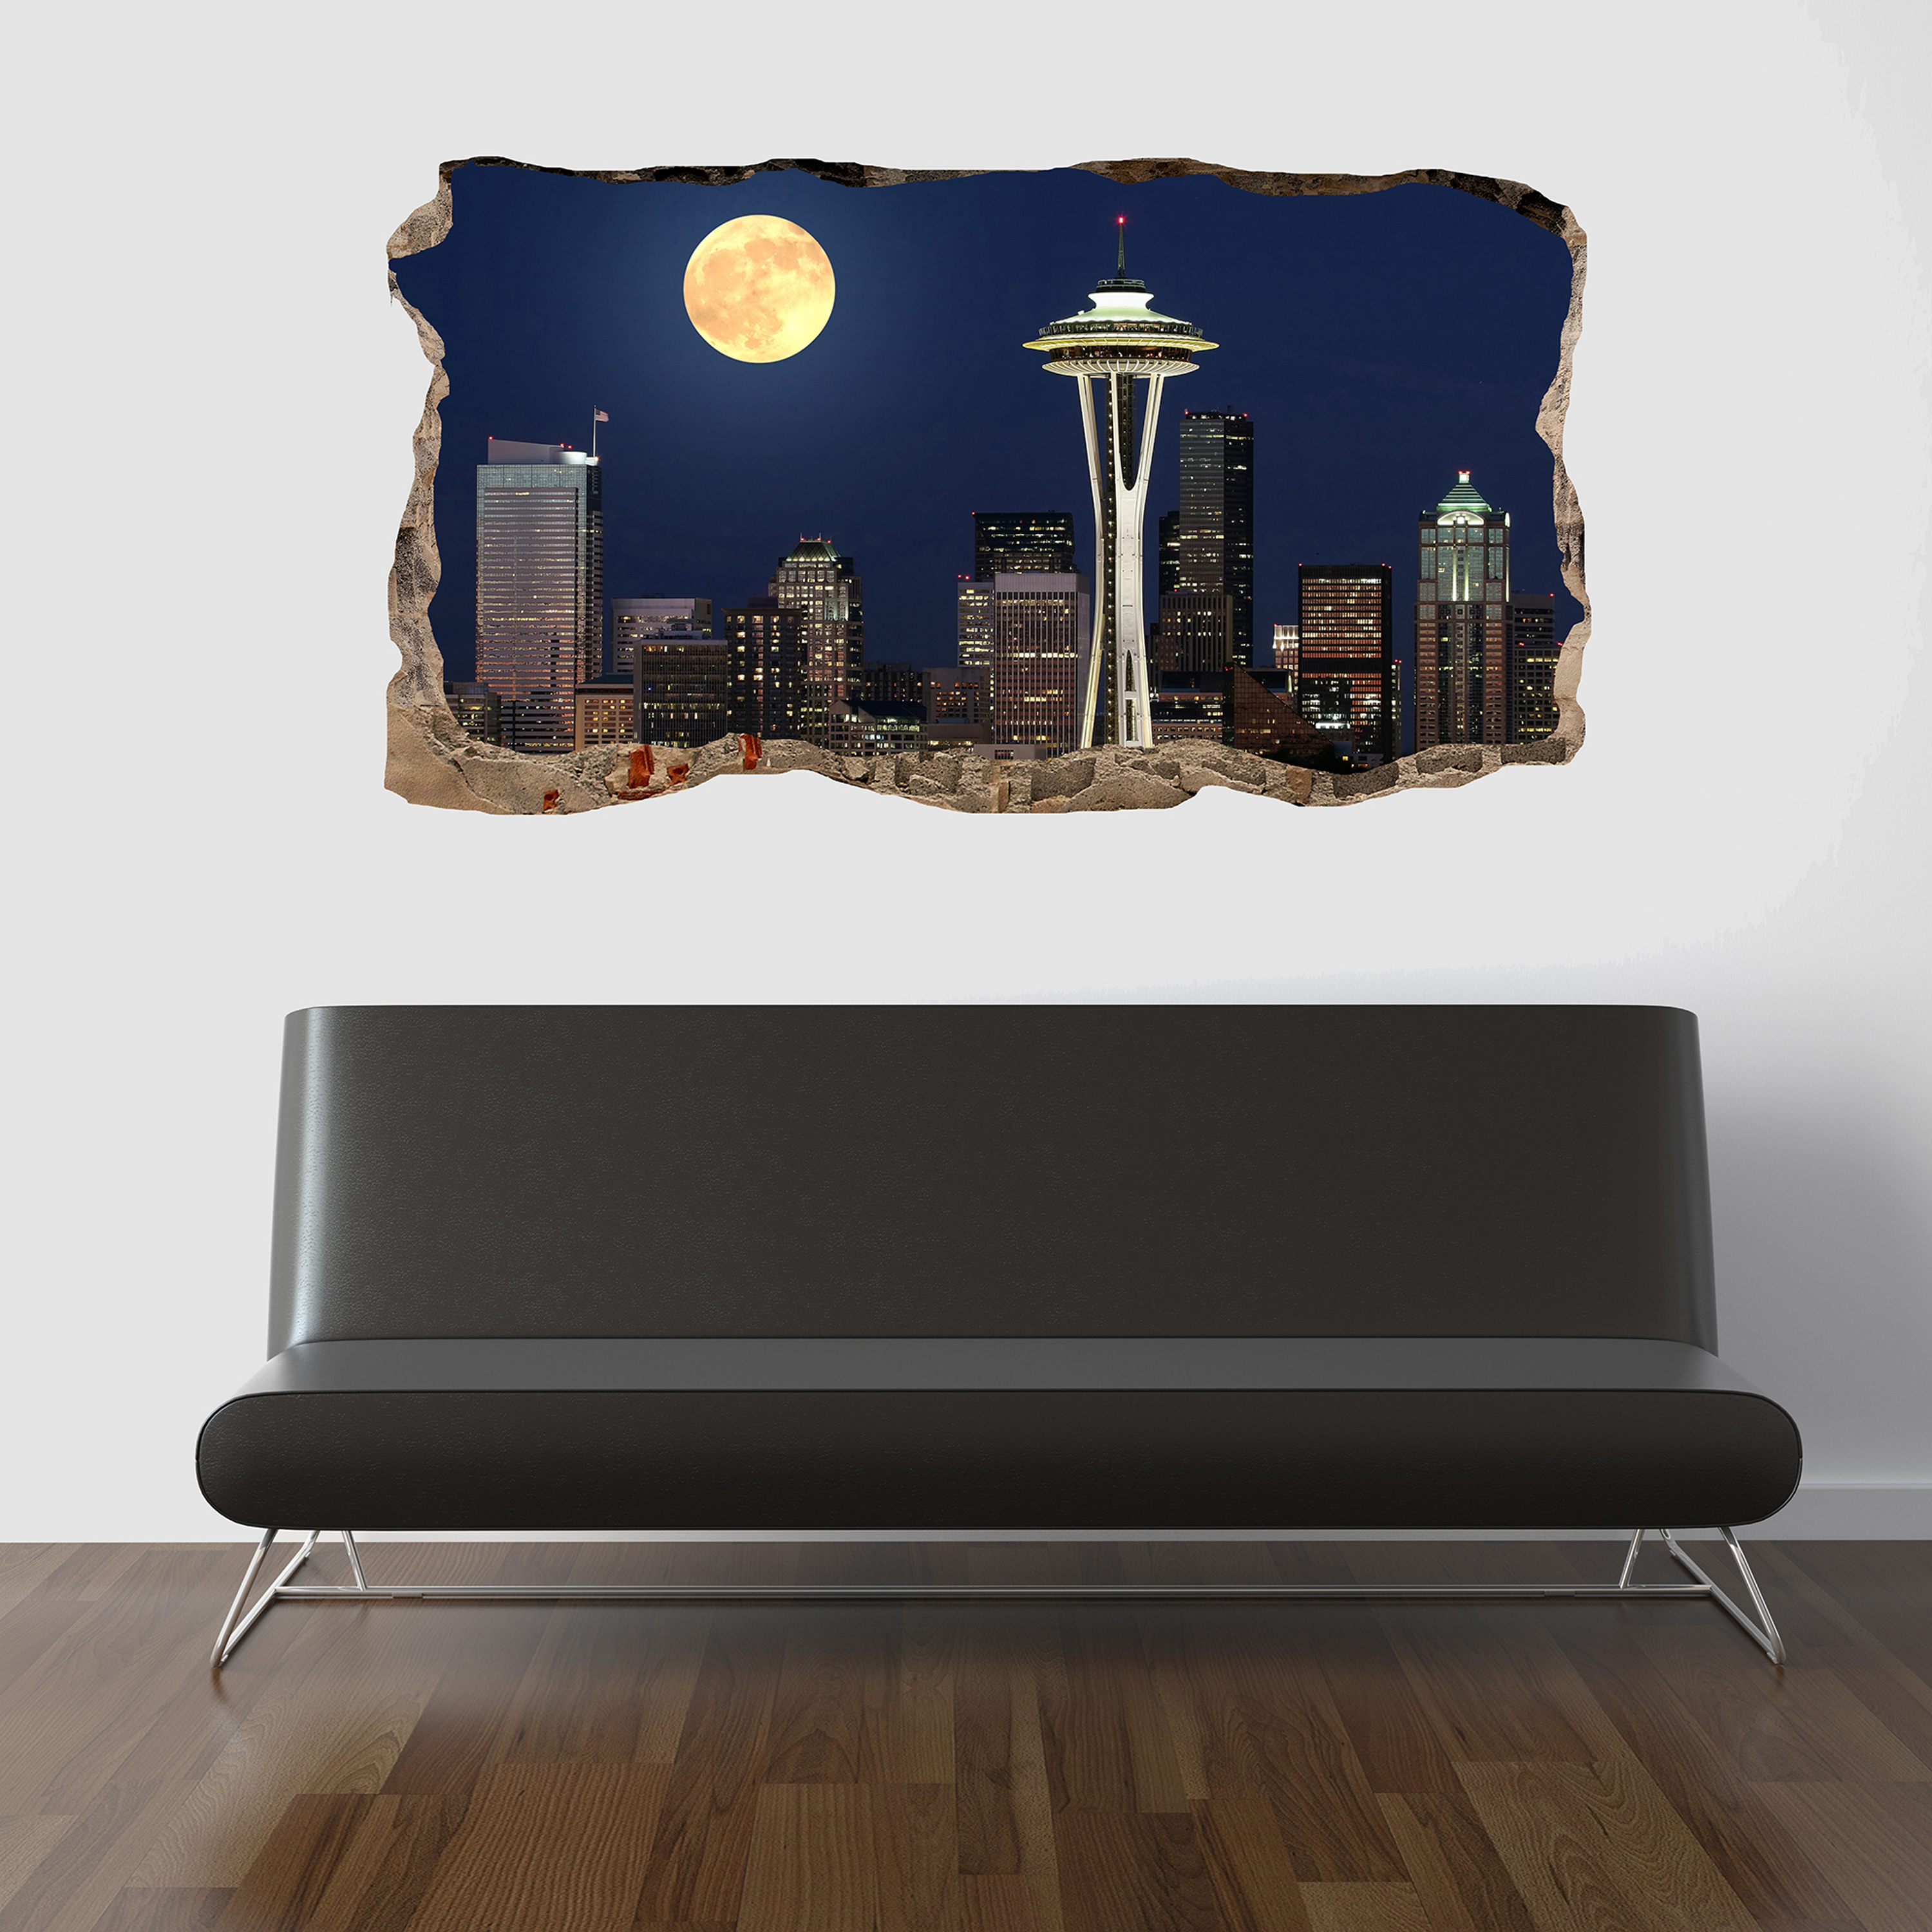 Startonight 3D Mural Wall Art Photo Decor Window Moon on the City Amazing Dual View Surprise Large 47.24 By 86.61 inch Wall Mural Wallpaper Bedroom Urban Collection Wall Paper Art - image 1 of 4